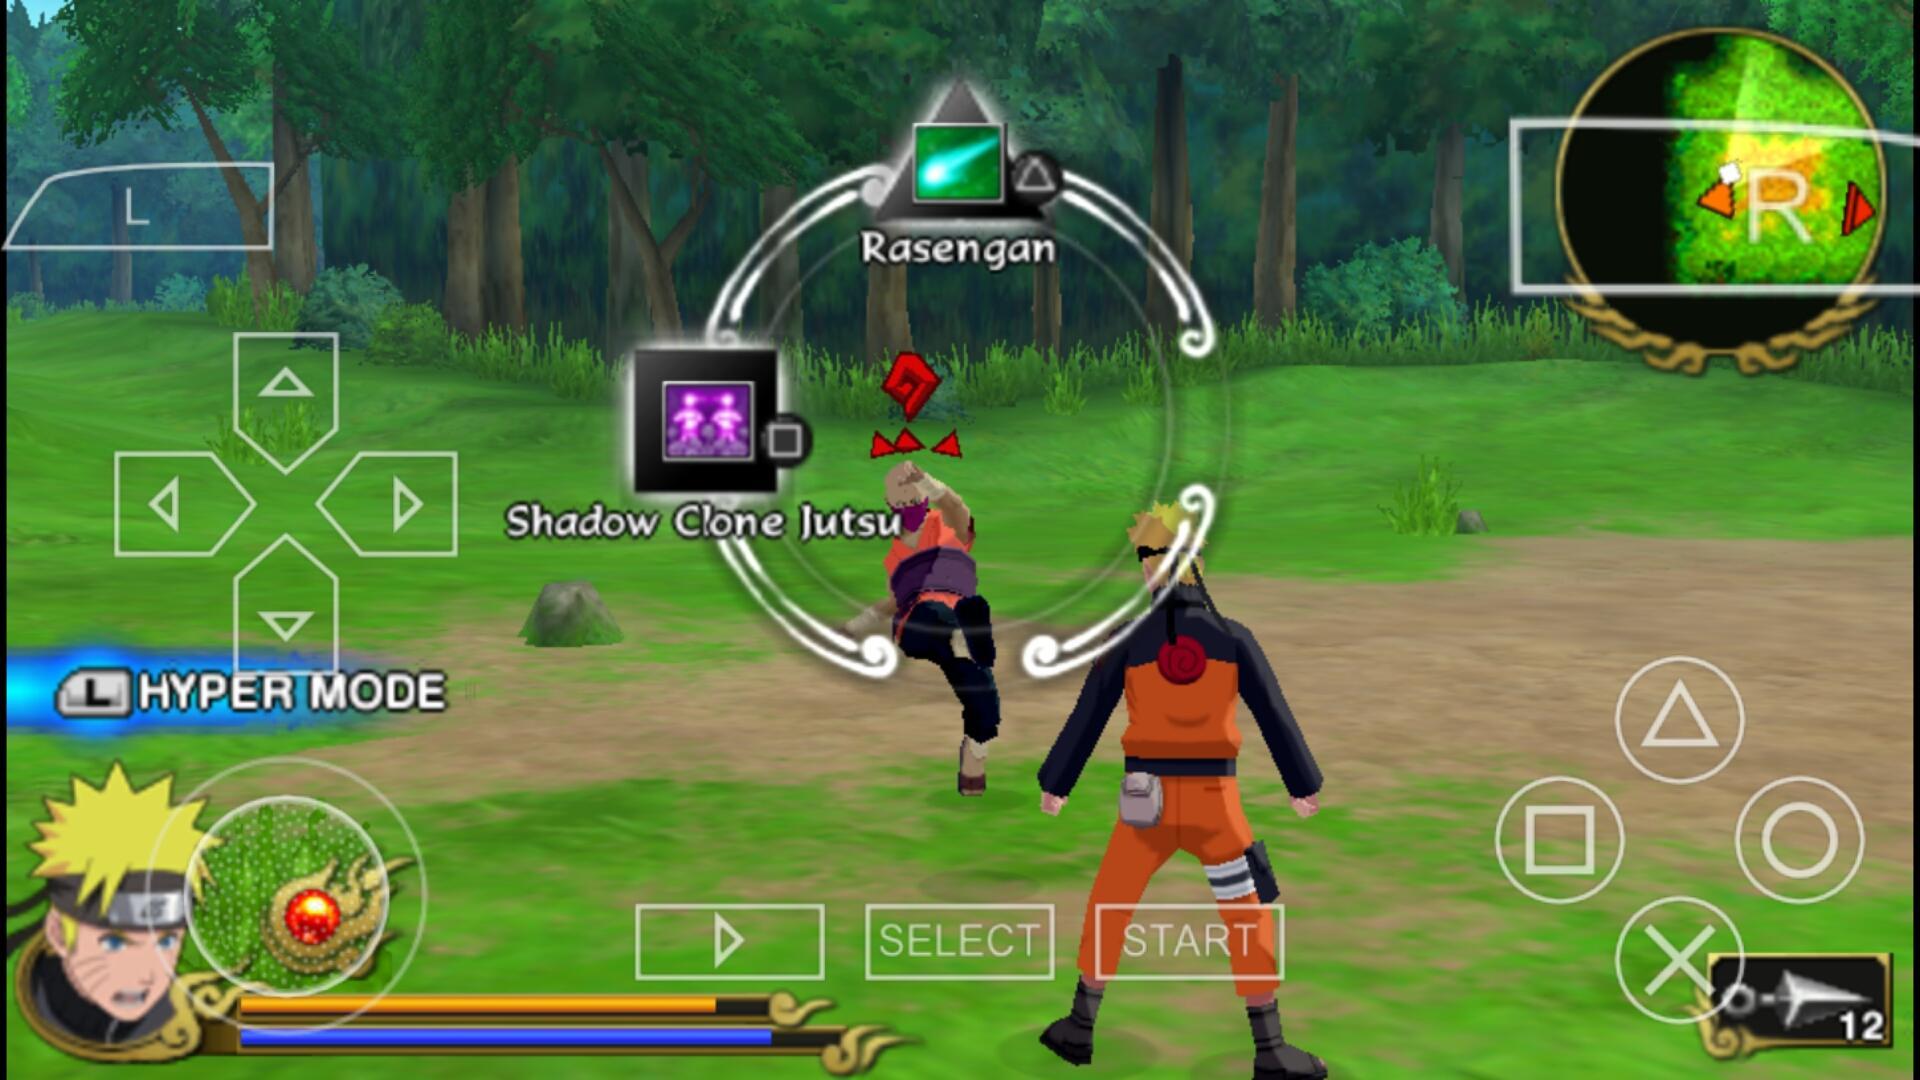 Naruto Games: Ultimate Ninja Shippuden Storm 4 for Android - APK Download